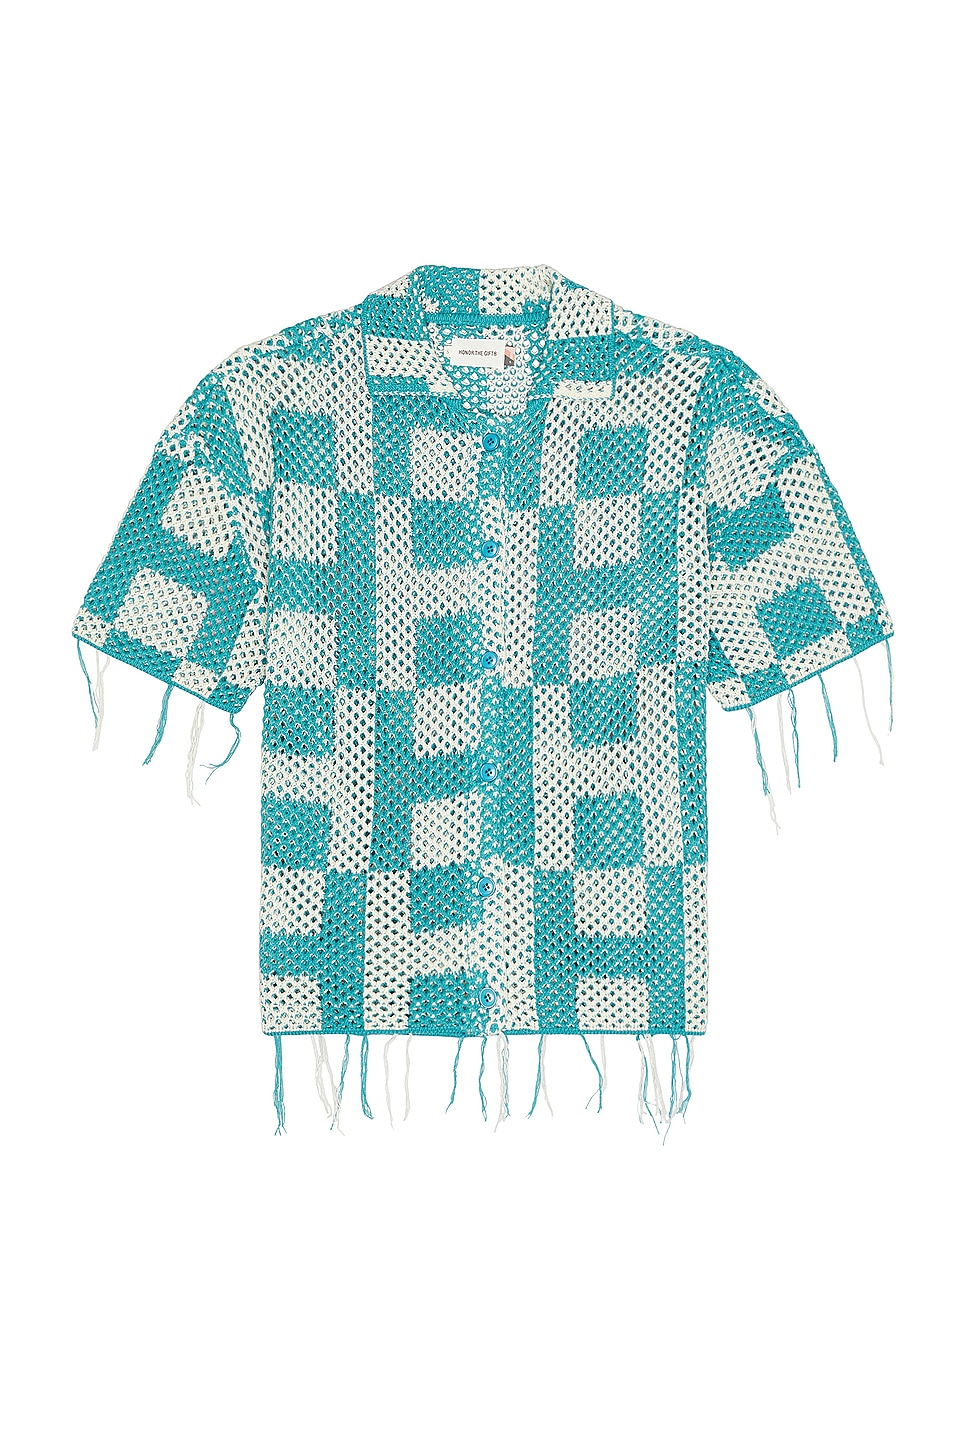 Image 1 of Honor The Gift A-spring Unisex Crochet Button Down Shirt in Teal